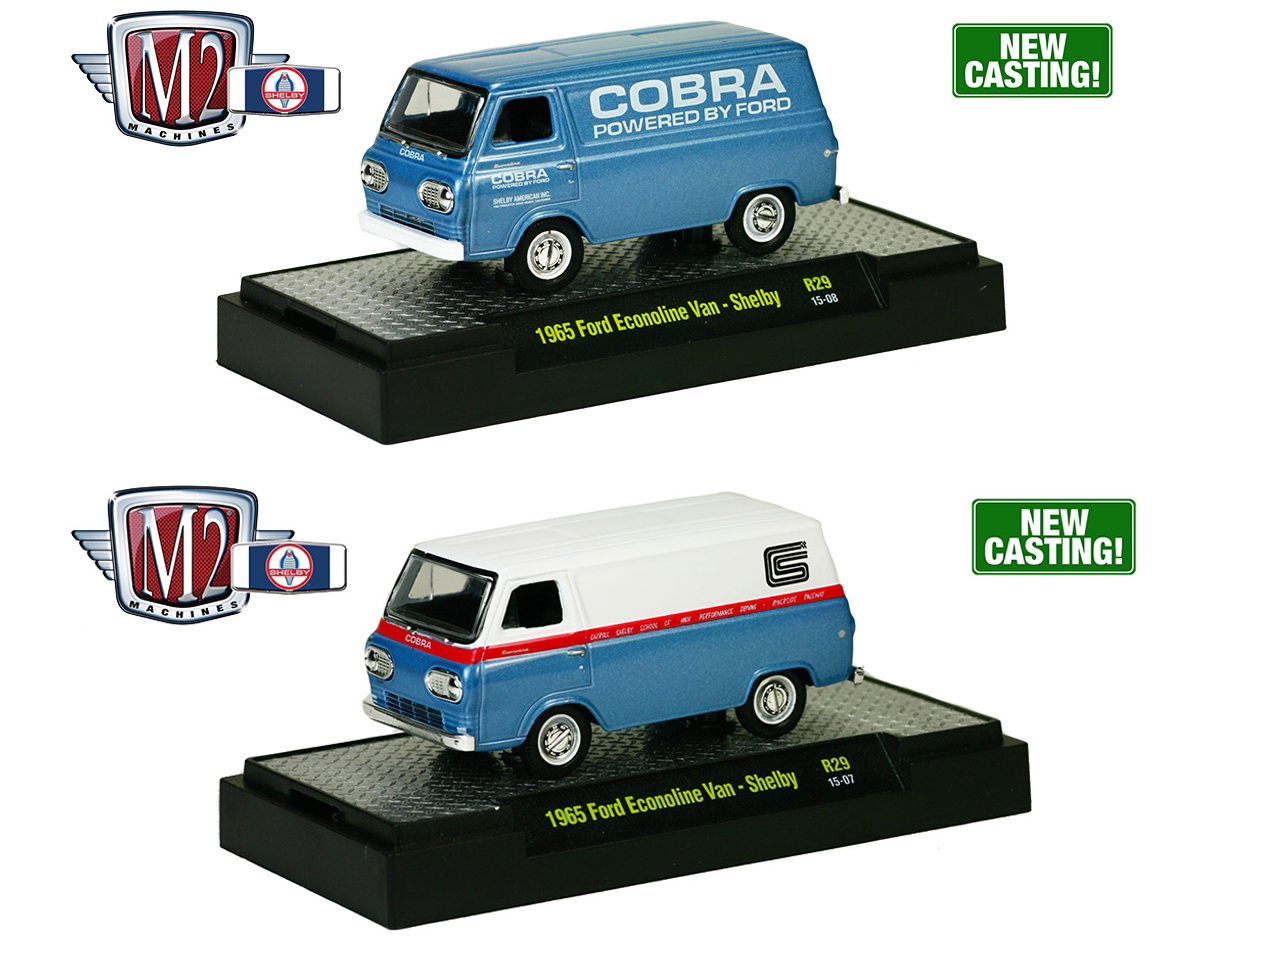 Detroit Muscle 1965 Ford Econoline Vans Set Of 2 Shelby Release 29 S With Cases 1/64 Diecast Models By M2 Machines